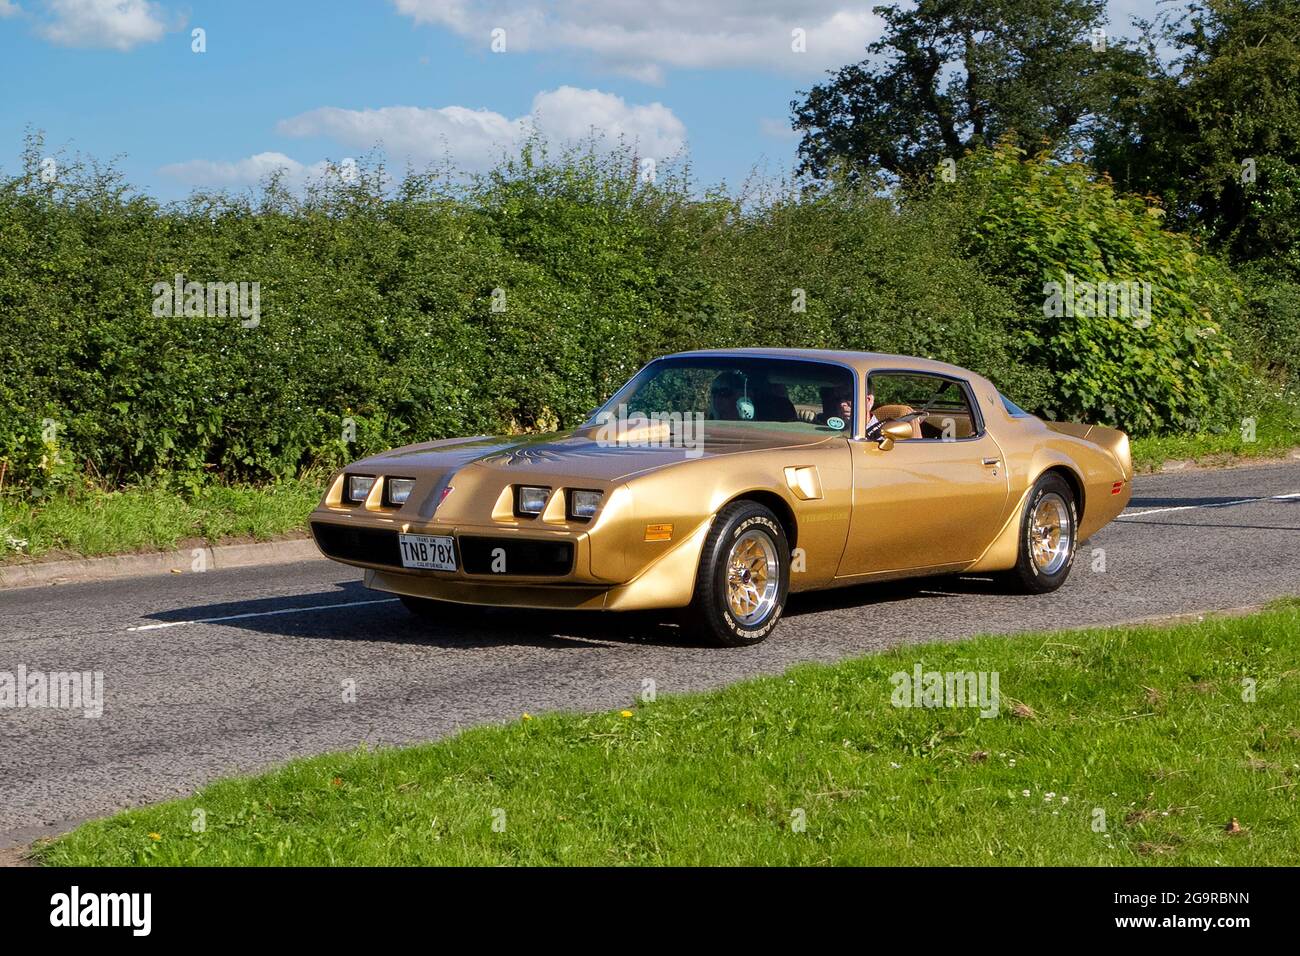 1979 70s gold Pontiac Firebird 6590cc petrol vehicle en-route to Capesthorne Hall classic July car show, Cheshire, UK Stock Photo